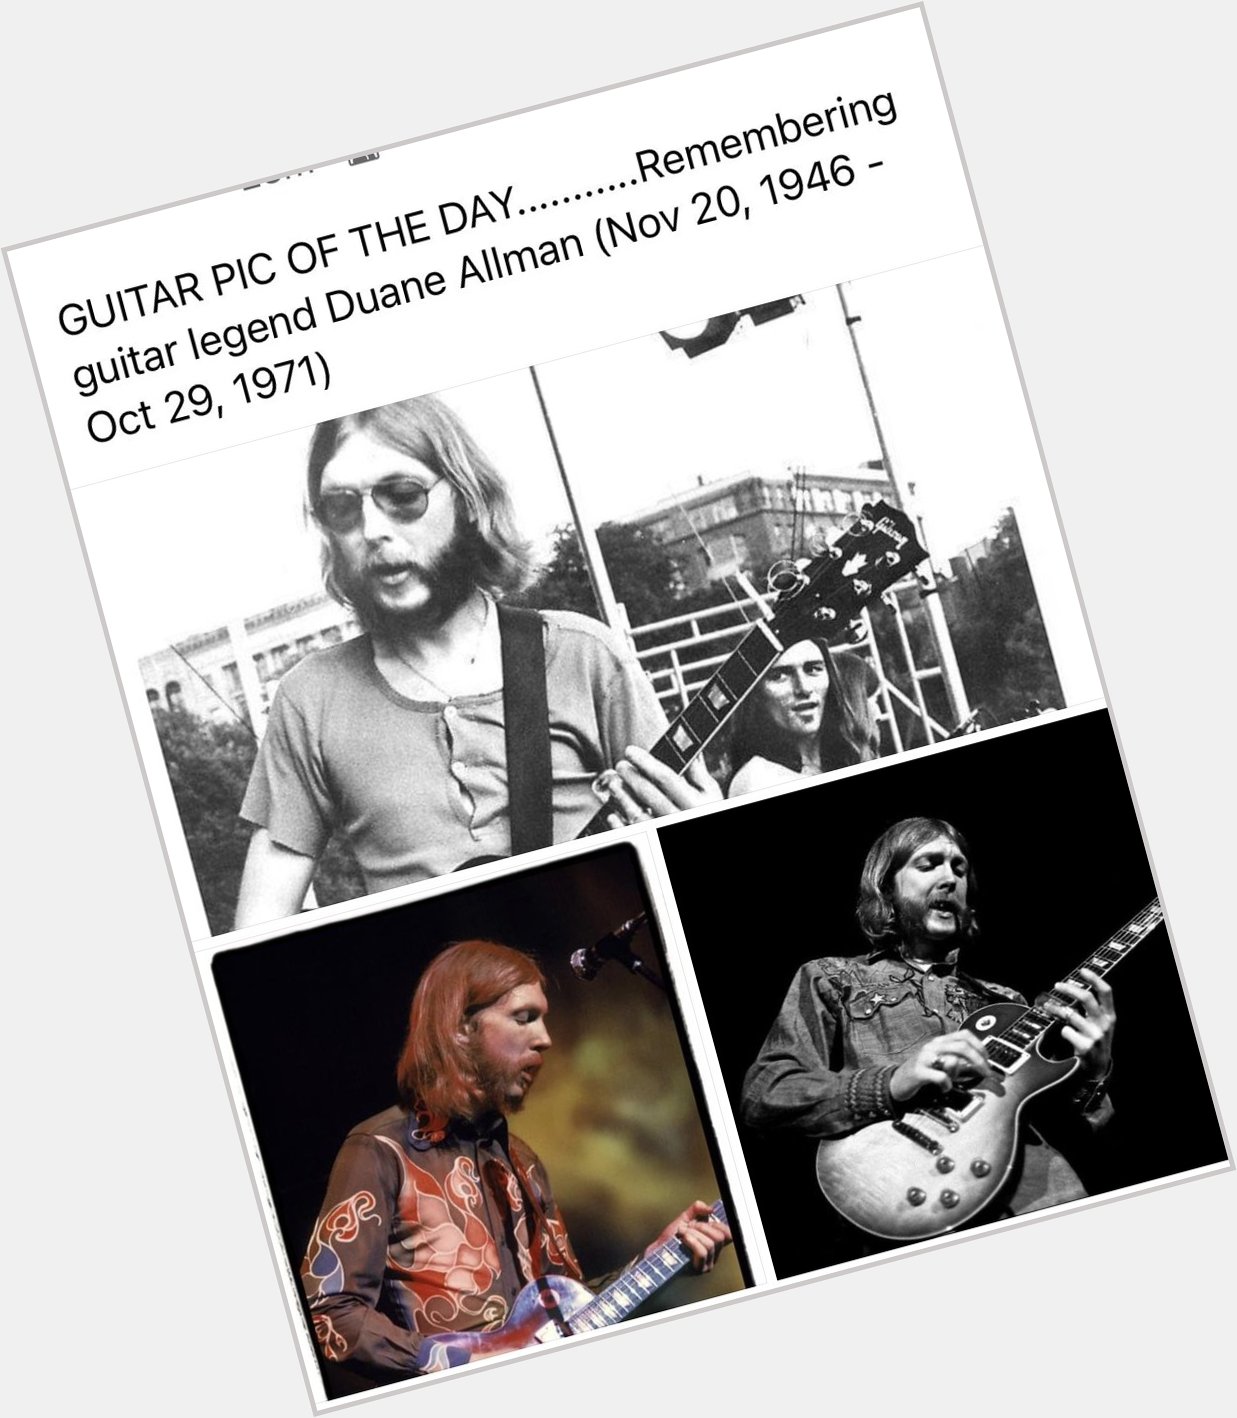   Looking great HAPPY BIRTHDAY same day as Duane Allman 